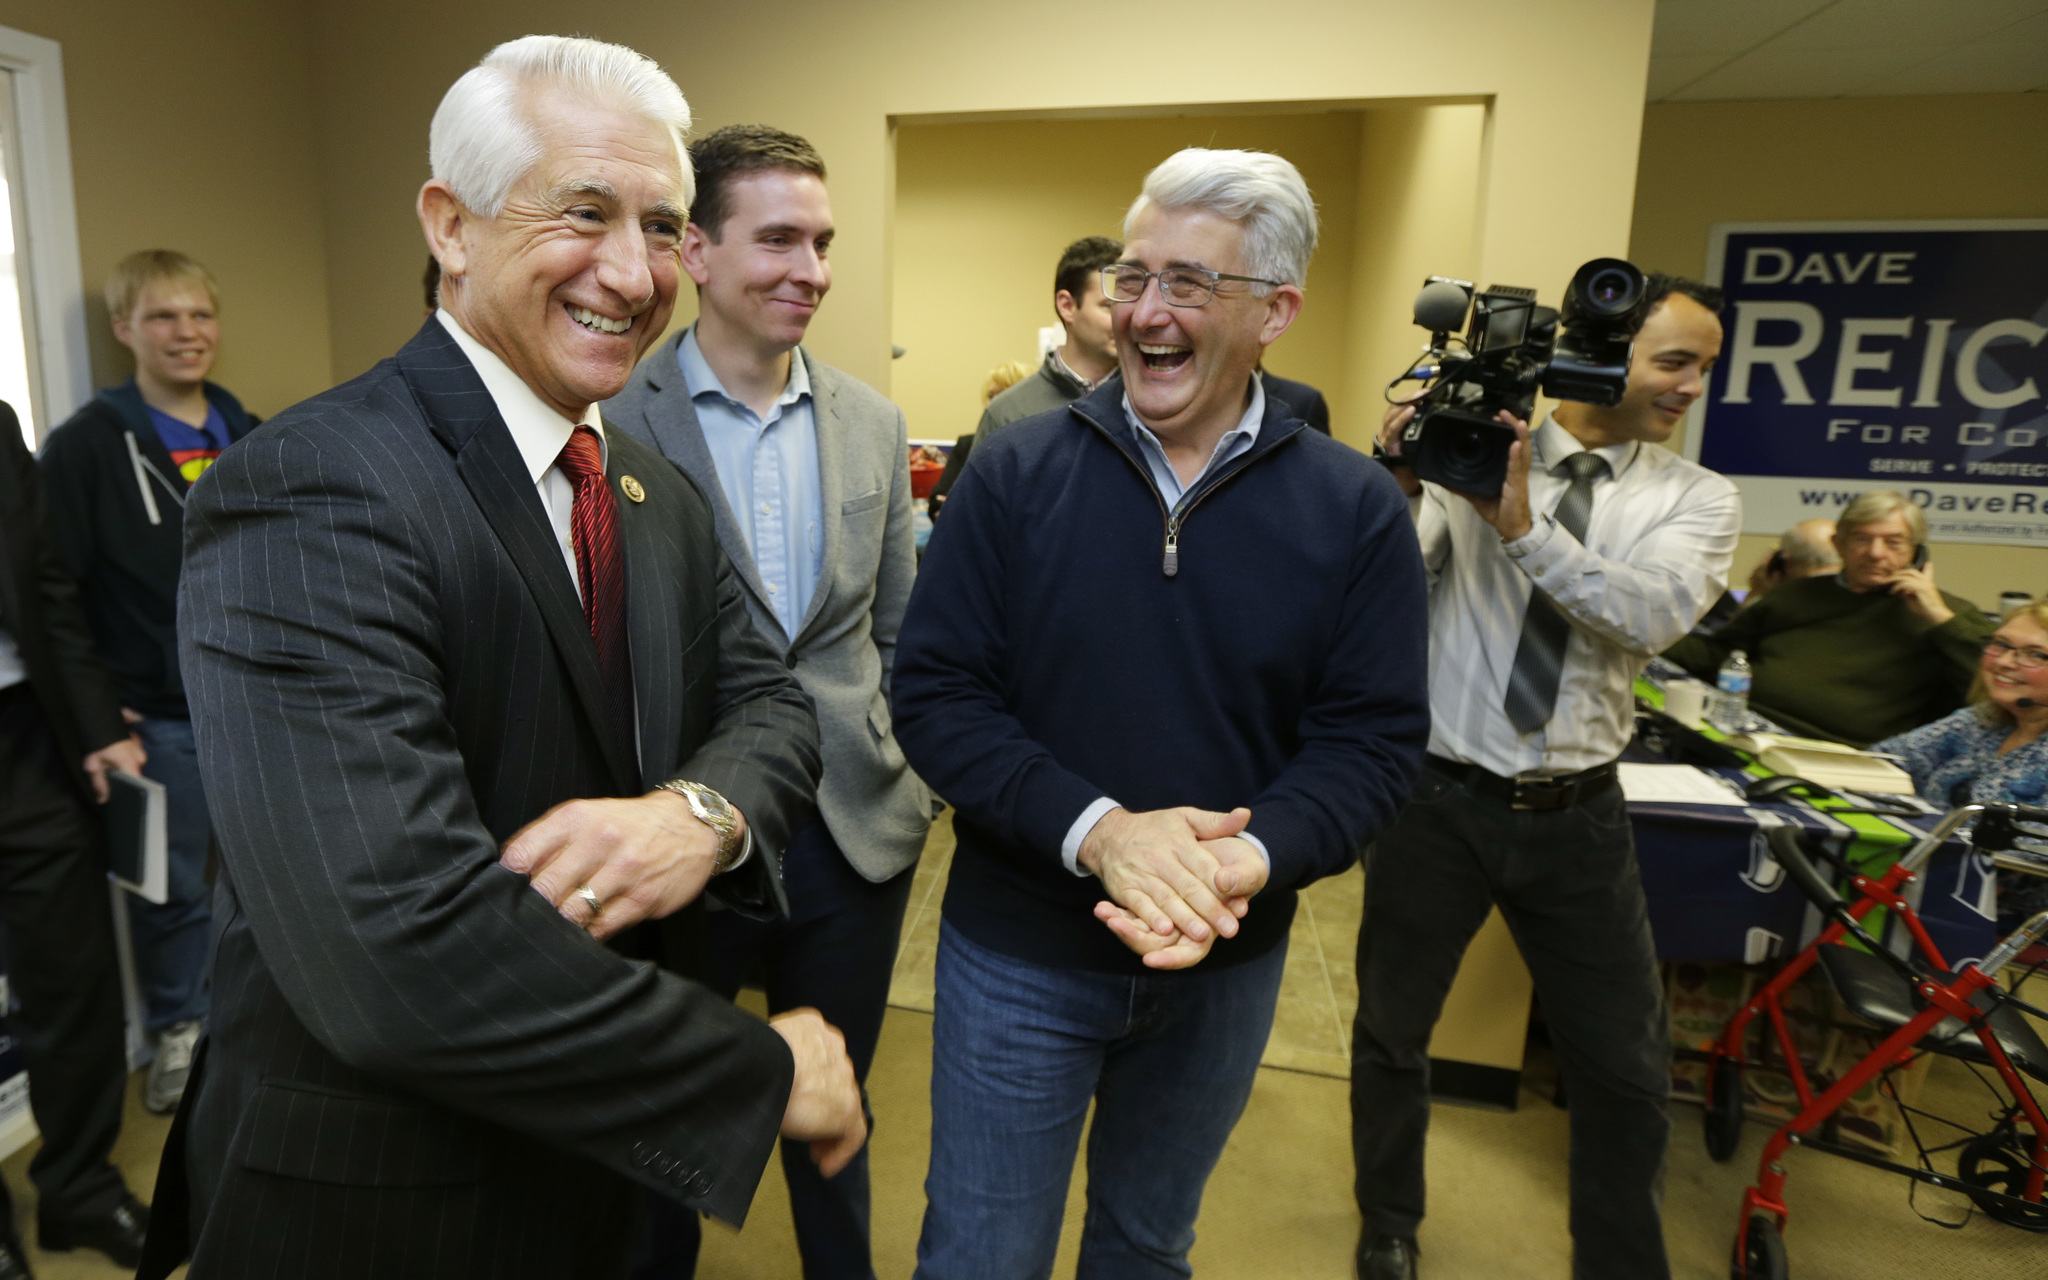 Bill Bryant, center, the Republican candidate for Washington state governor, shares a laugh with U.S. Rep. Dave Reichert, D-Wash., left, following a get-out-the-vote rally Friday at a campaign office in Issaquah. (Ted S. Warren/The Associated Press)